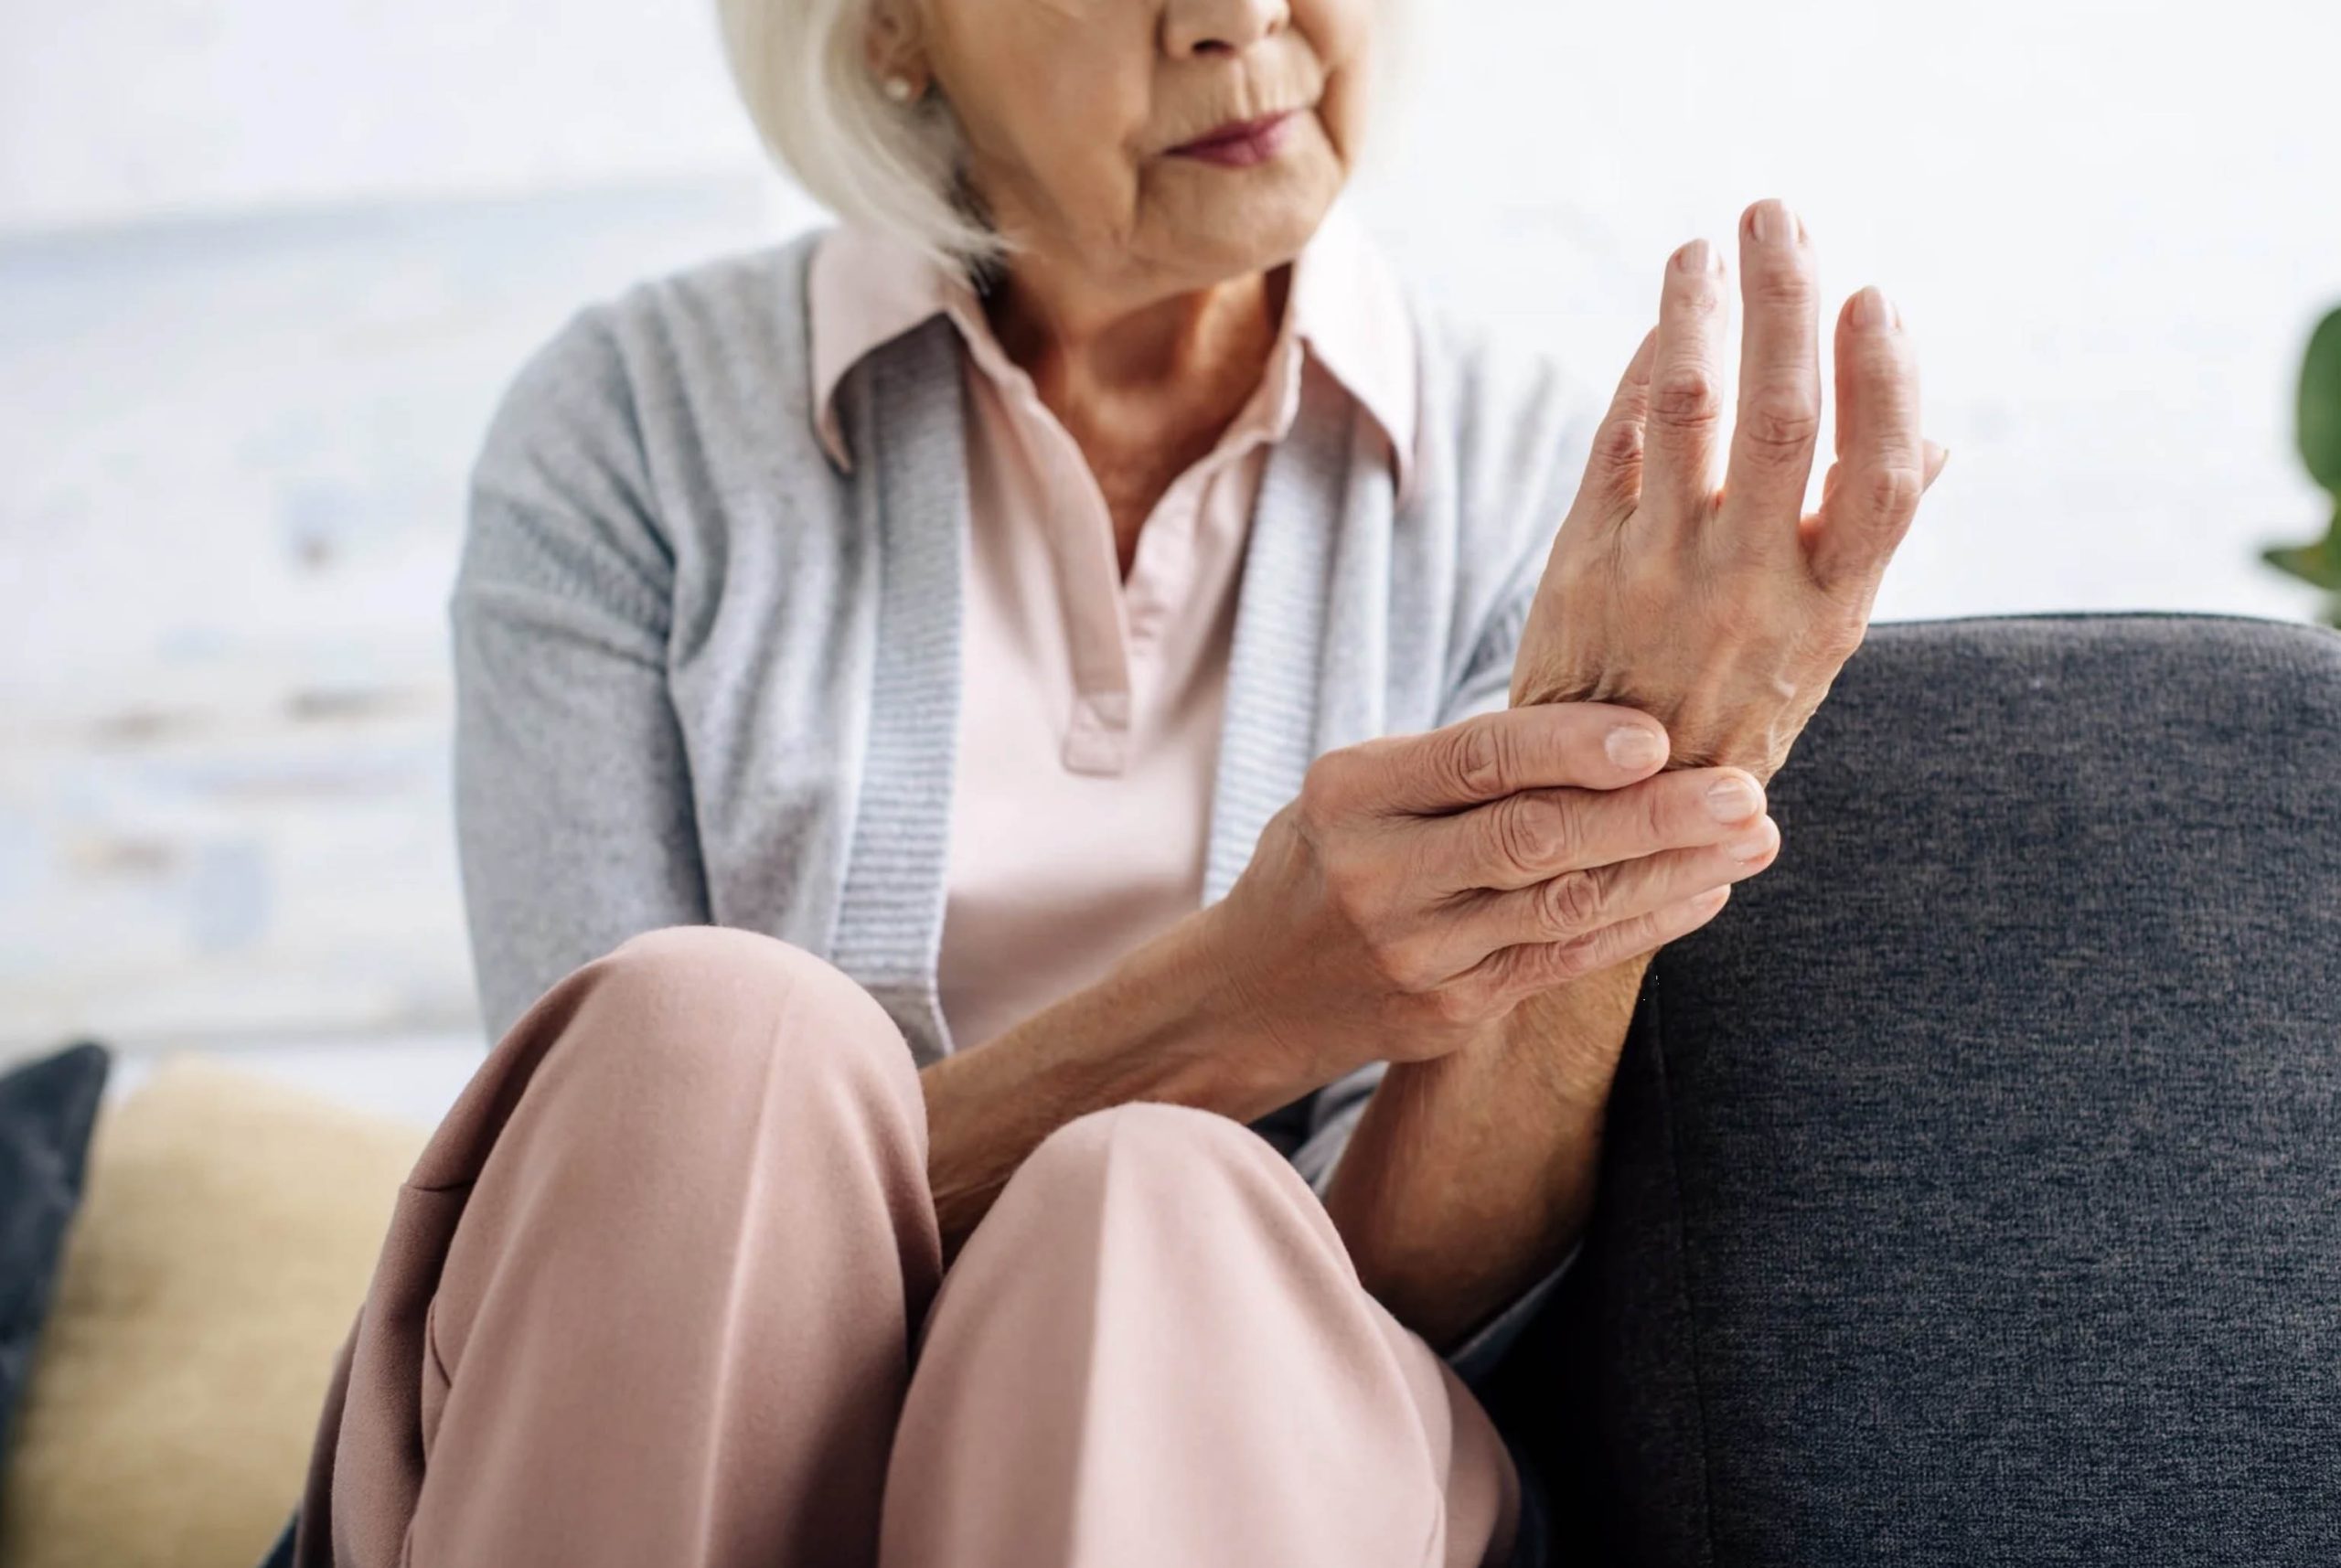 ACGrace - An elderly woman is sitting on a couch with her hand on her wrist.